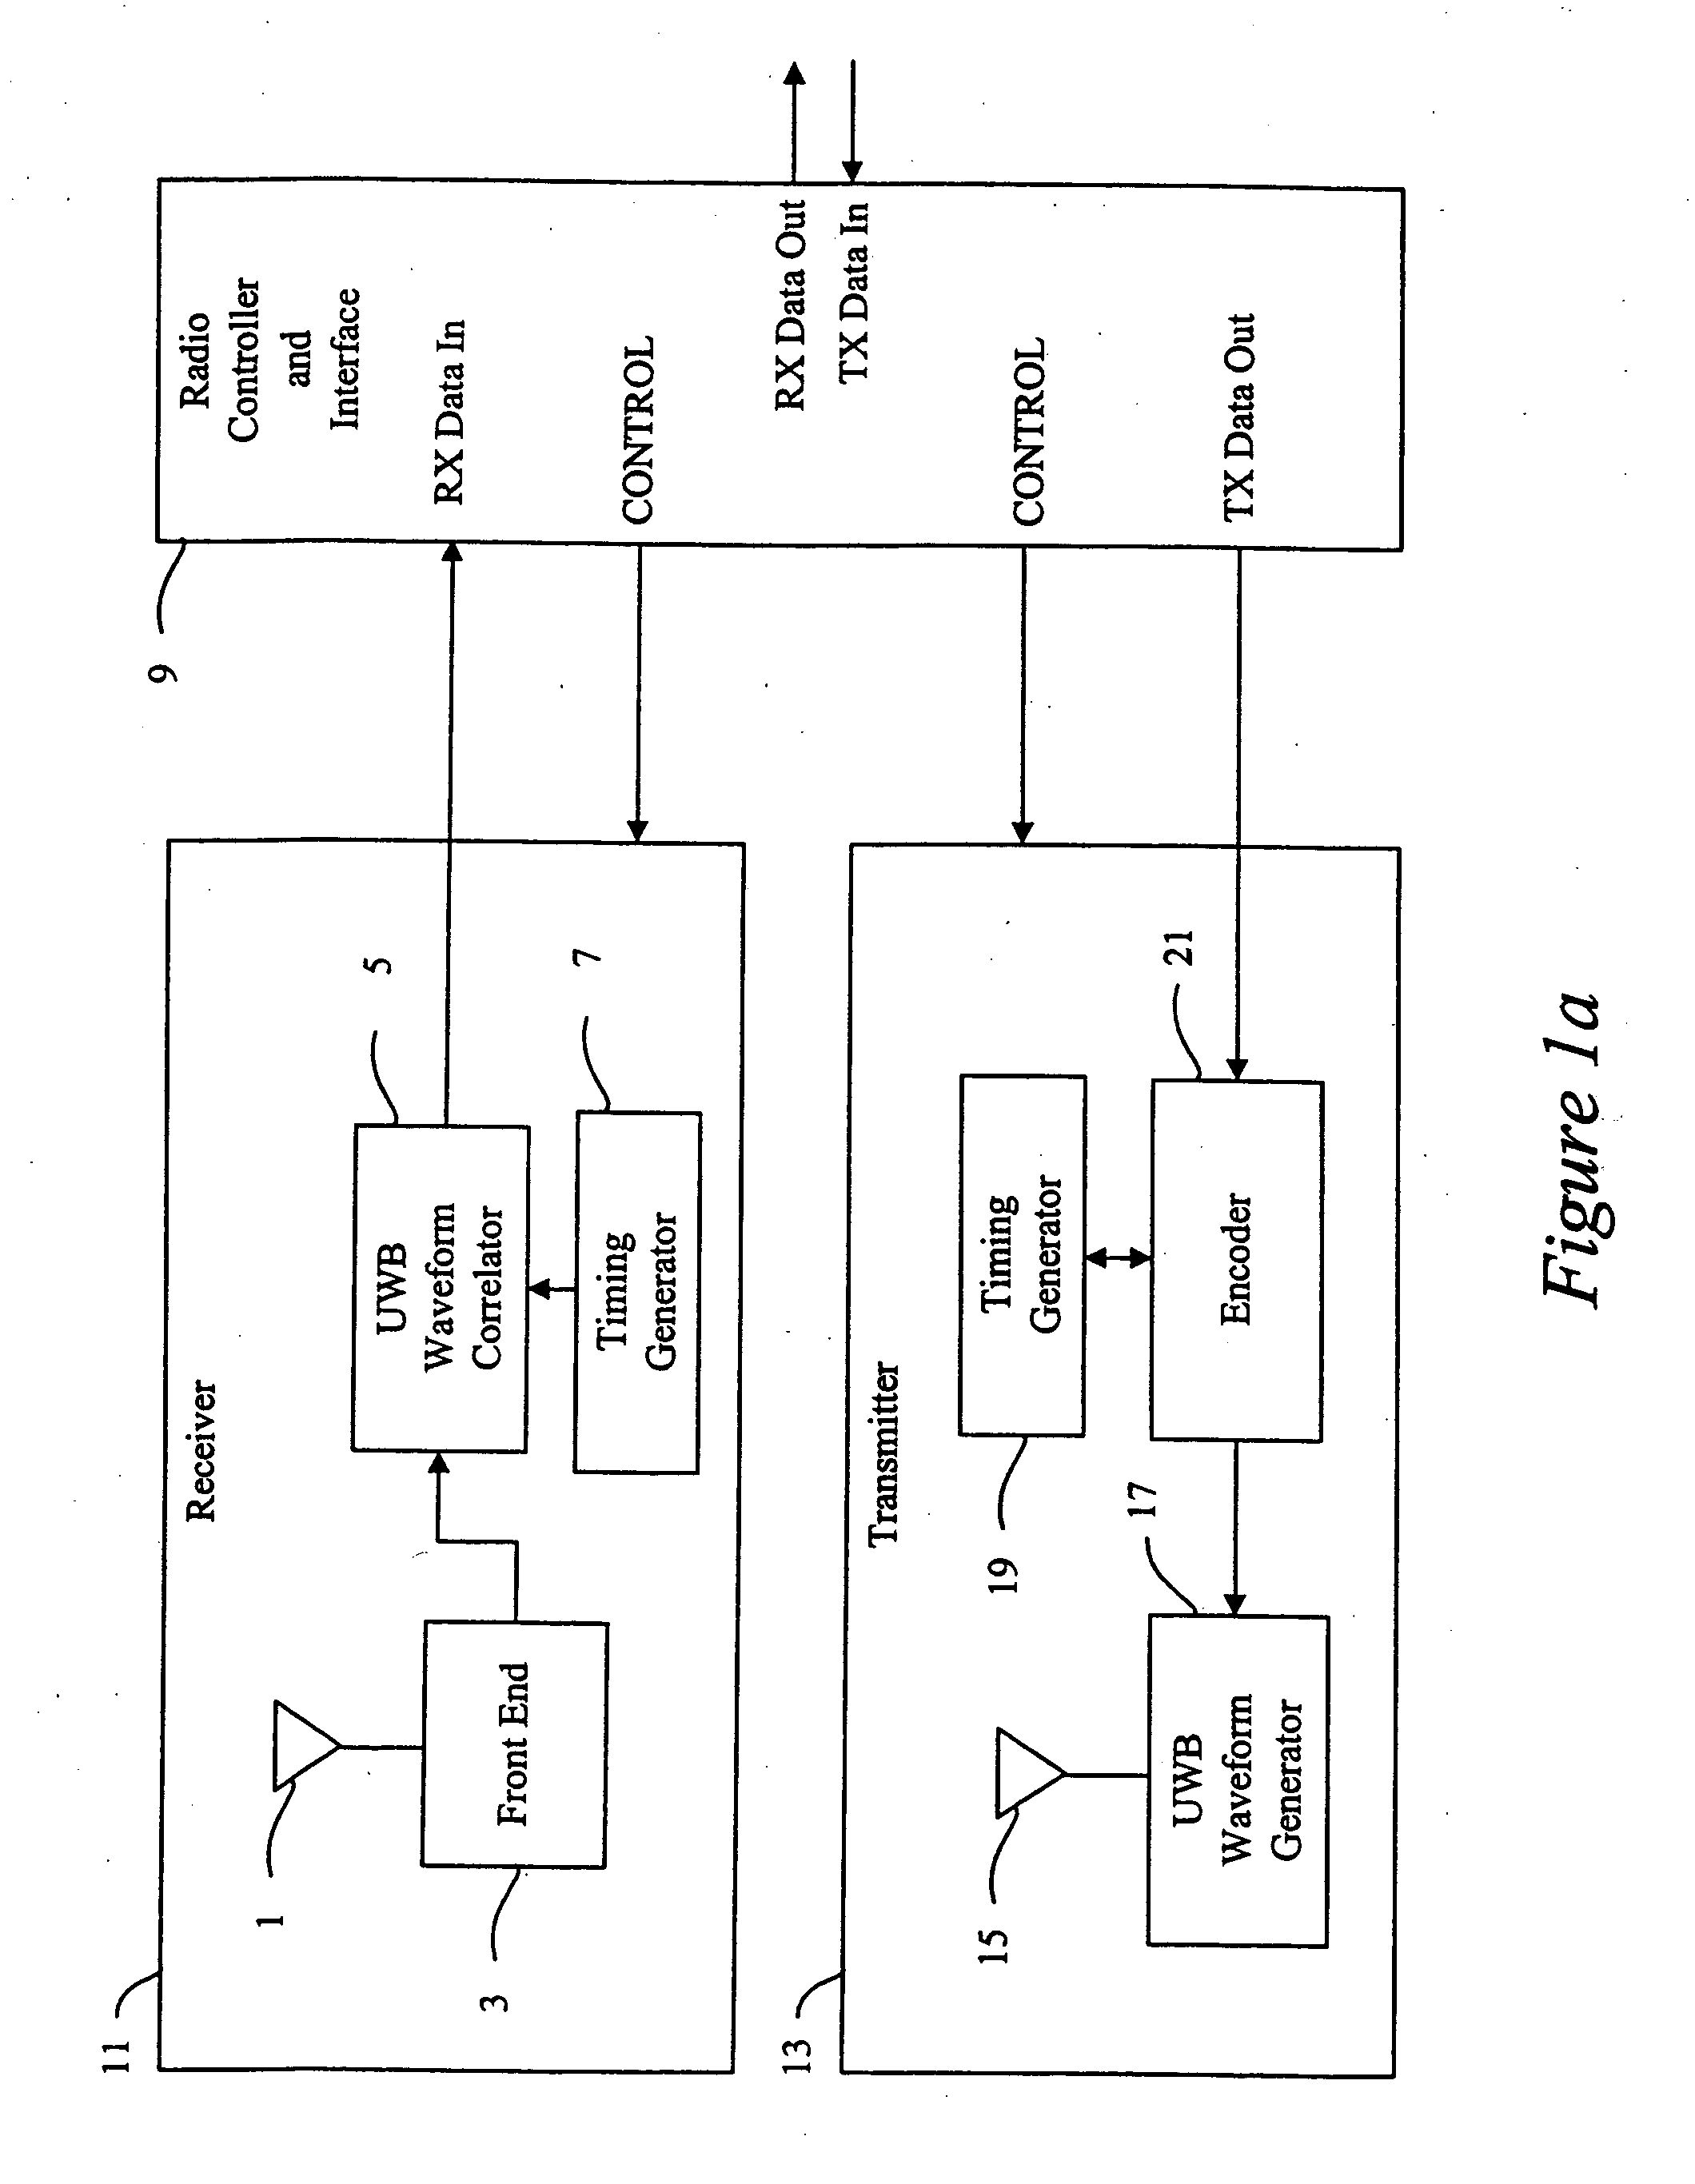 Ultra wideband communication system, method and device with low noise reception